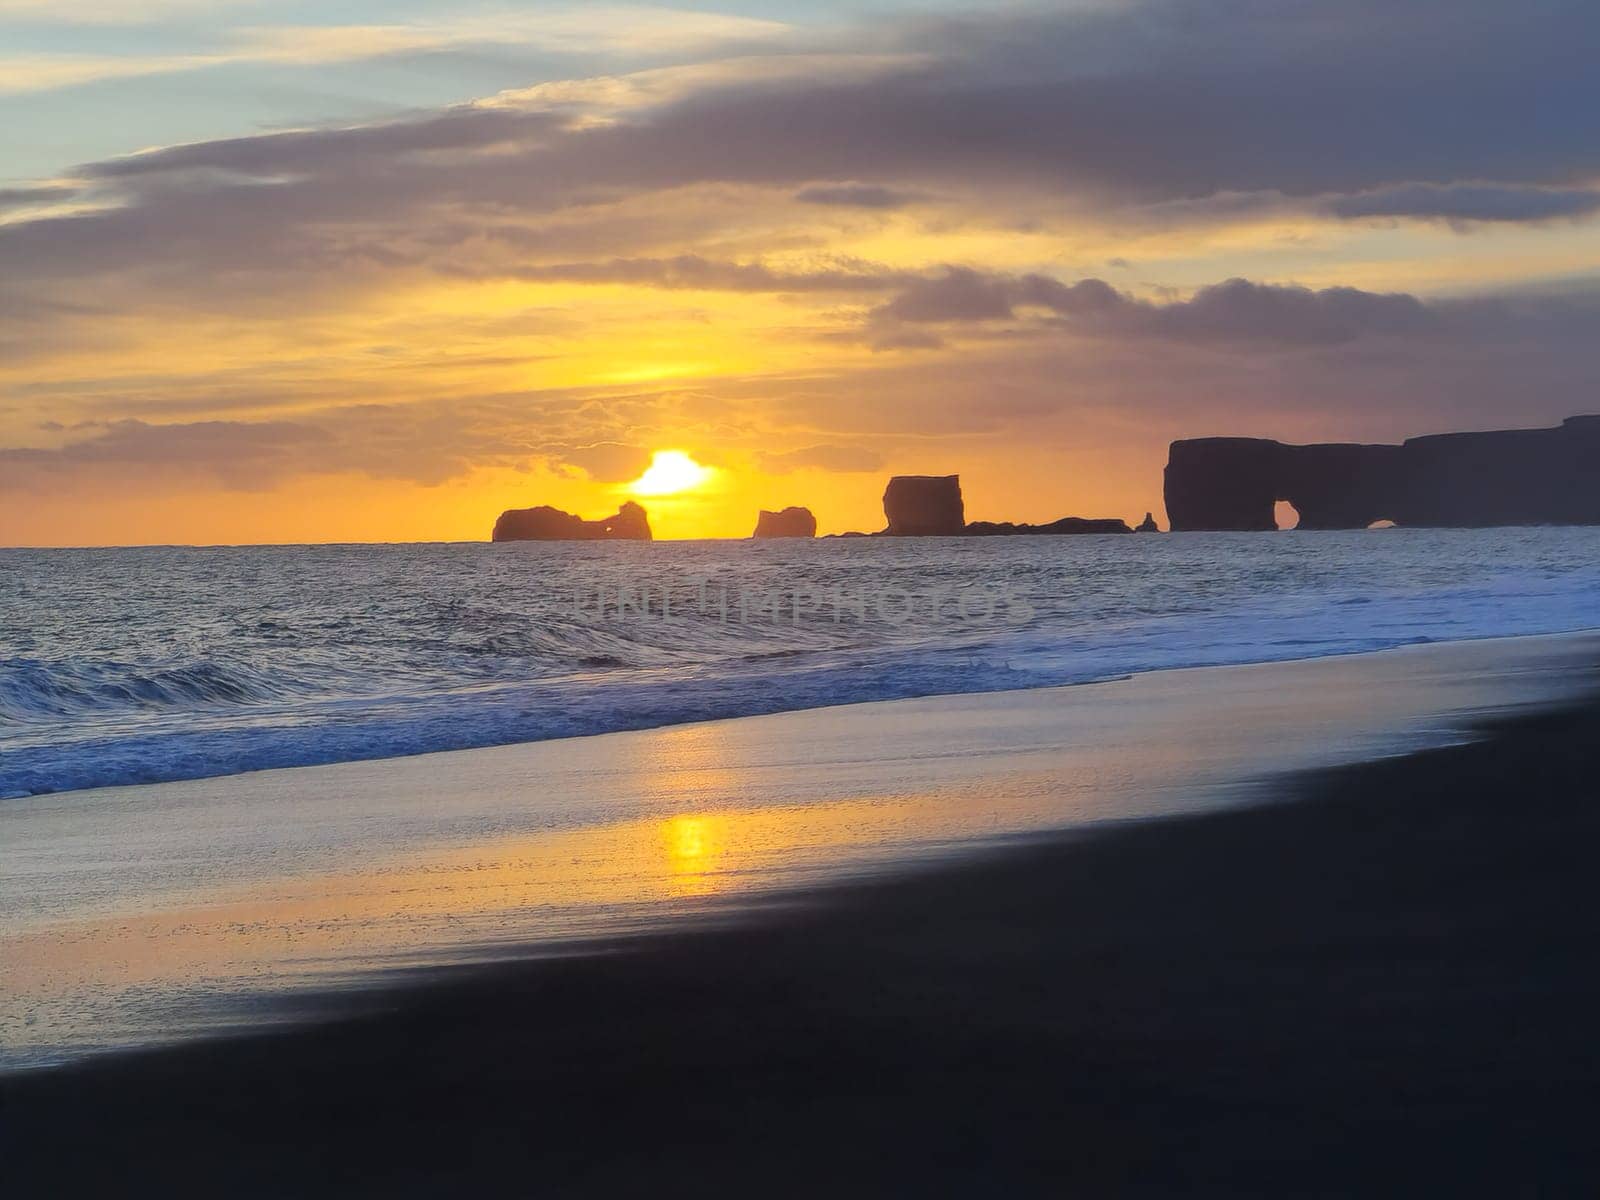 Gorgeous sunset in highlands icelandic region with snow covered rocks and fields, frozen lands in distance. Roadside picturesque beachfront with northern landscape of hills and fields in Iceland.